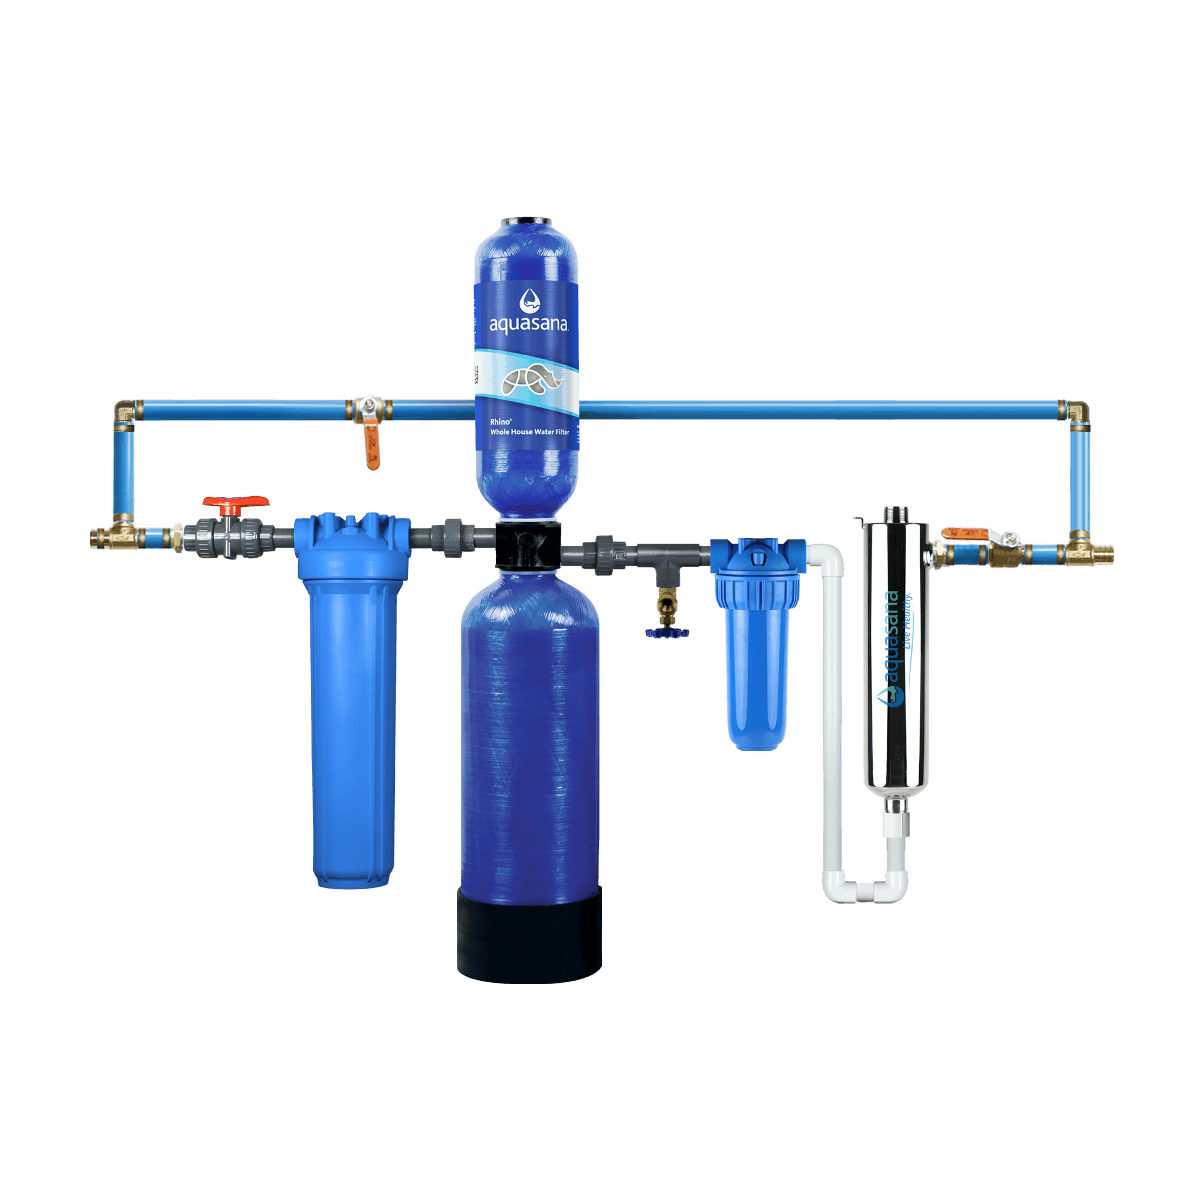 Rhino® Whole House Water UV Filter System Home Water Filtration 1 Million Gallon Removes 99% of Bacteria & Viruses Aquasana